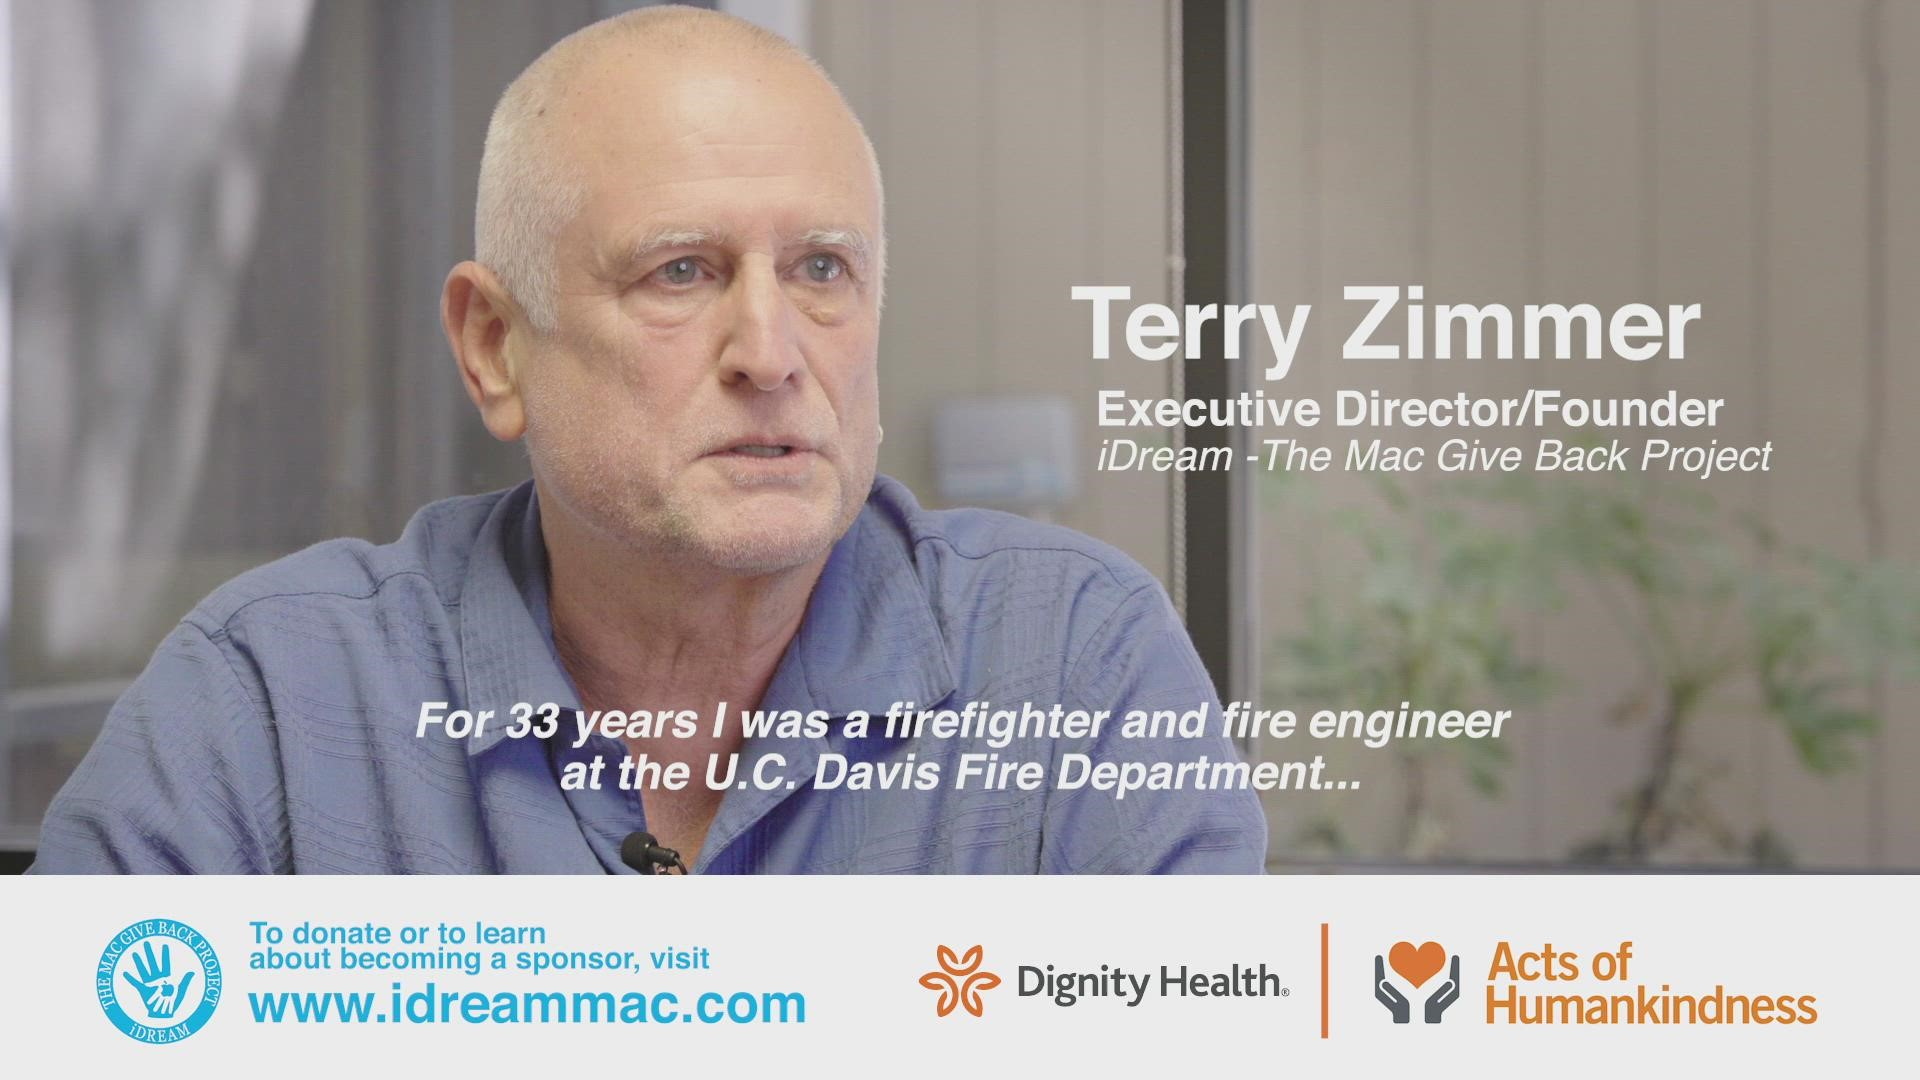 Terry Zimmer founded iDream the Mac Giveback Project in 2018 to provide computers to individuals and families in need.